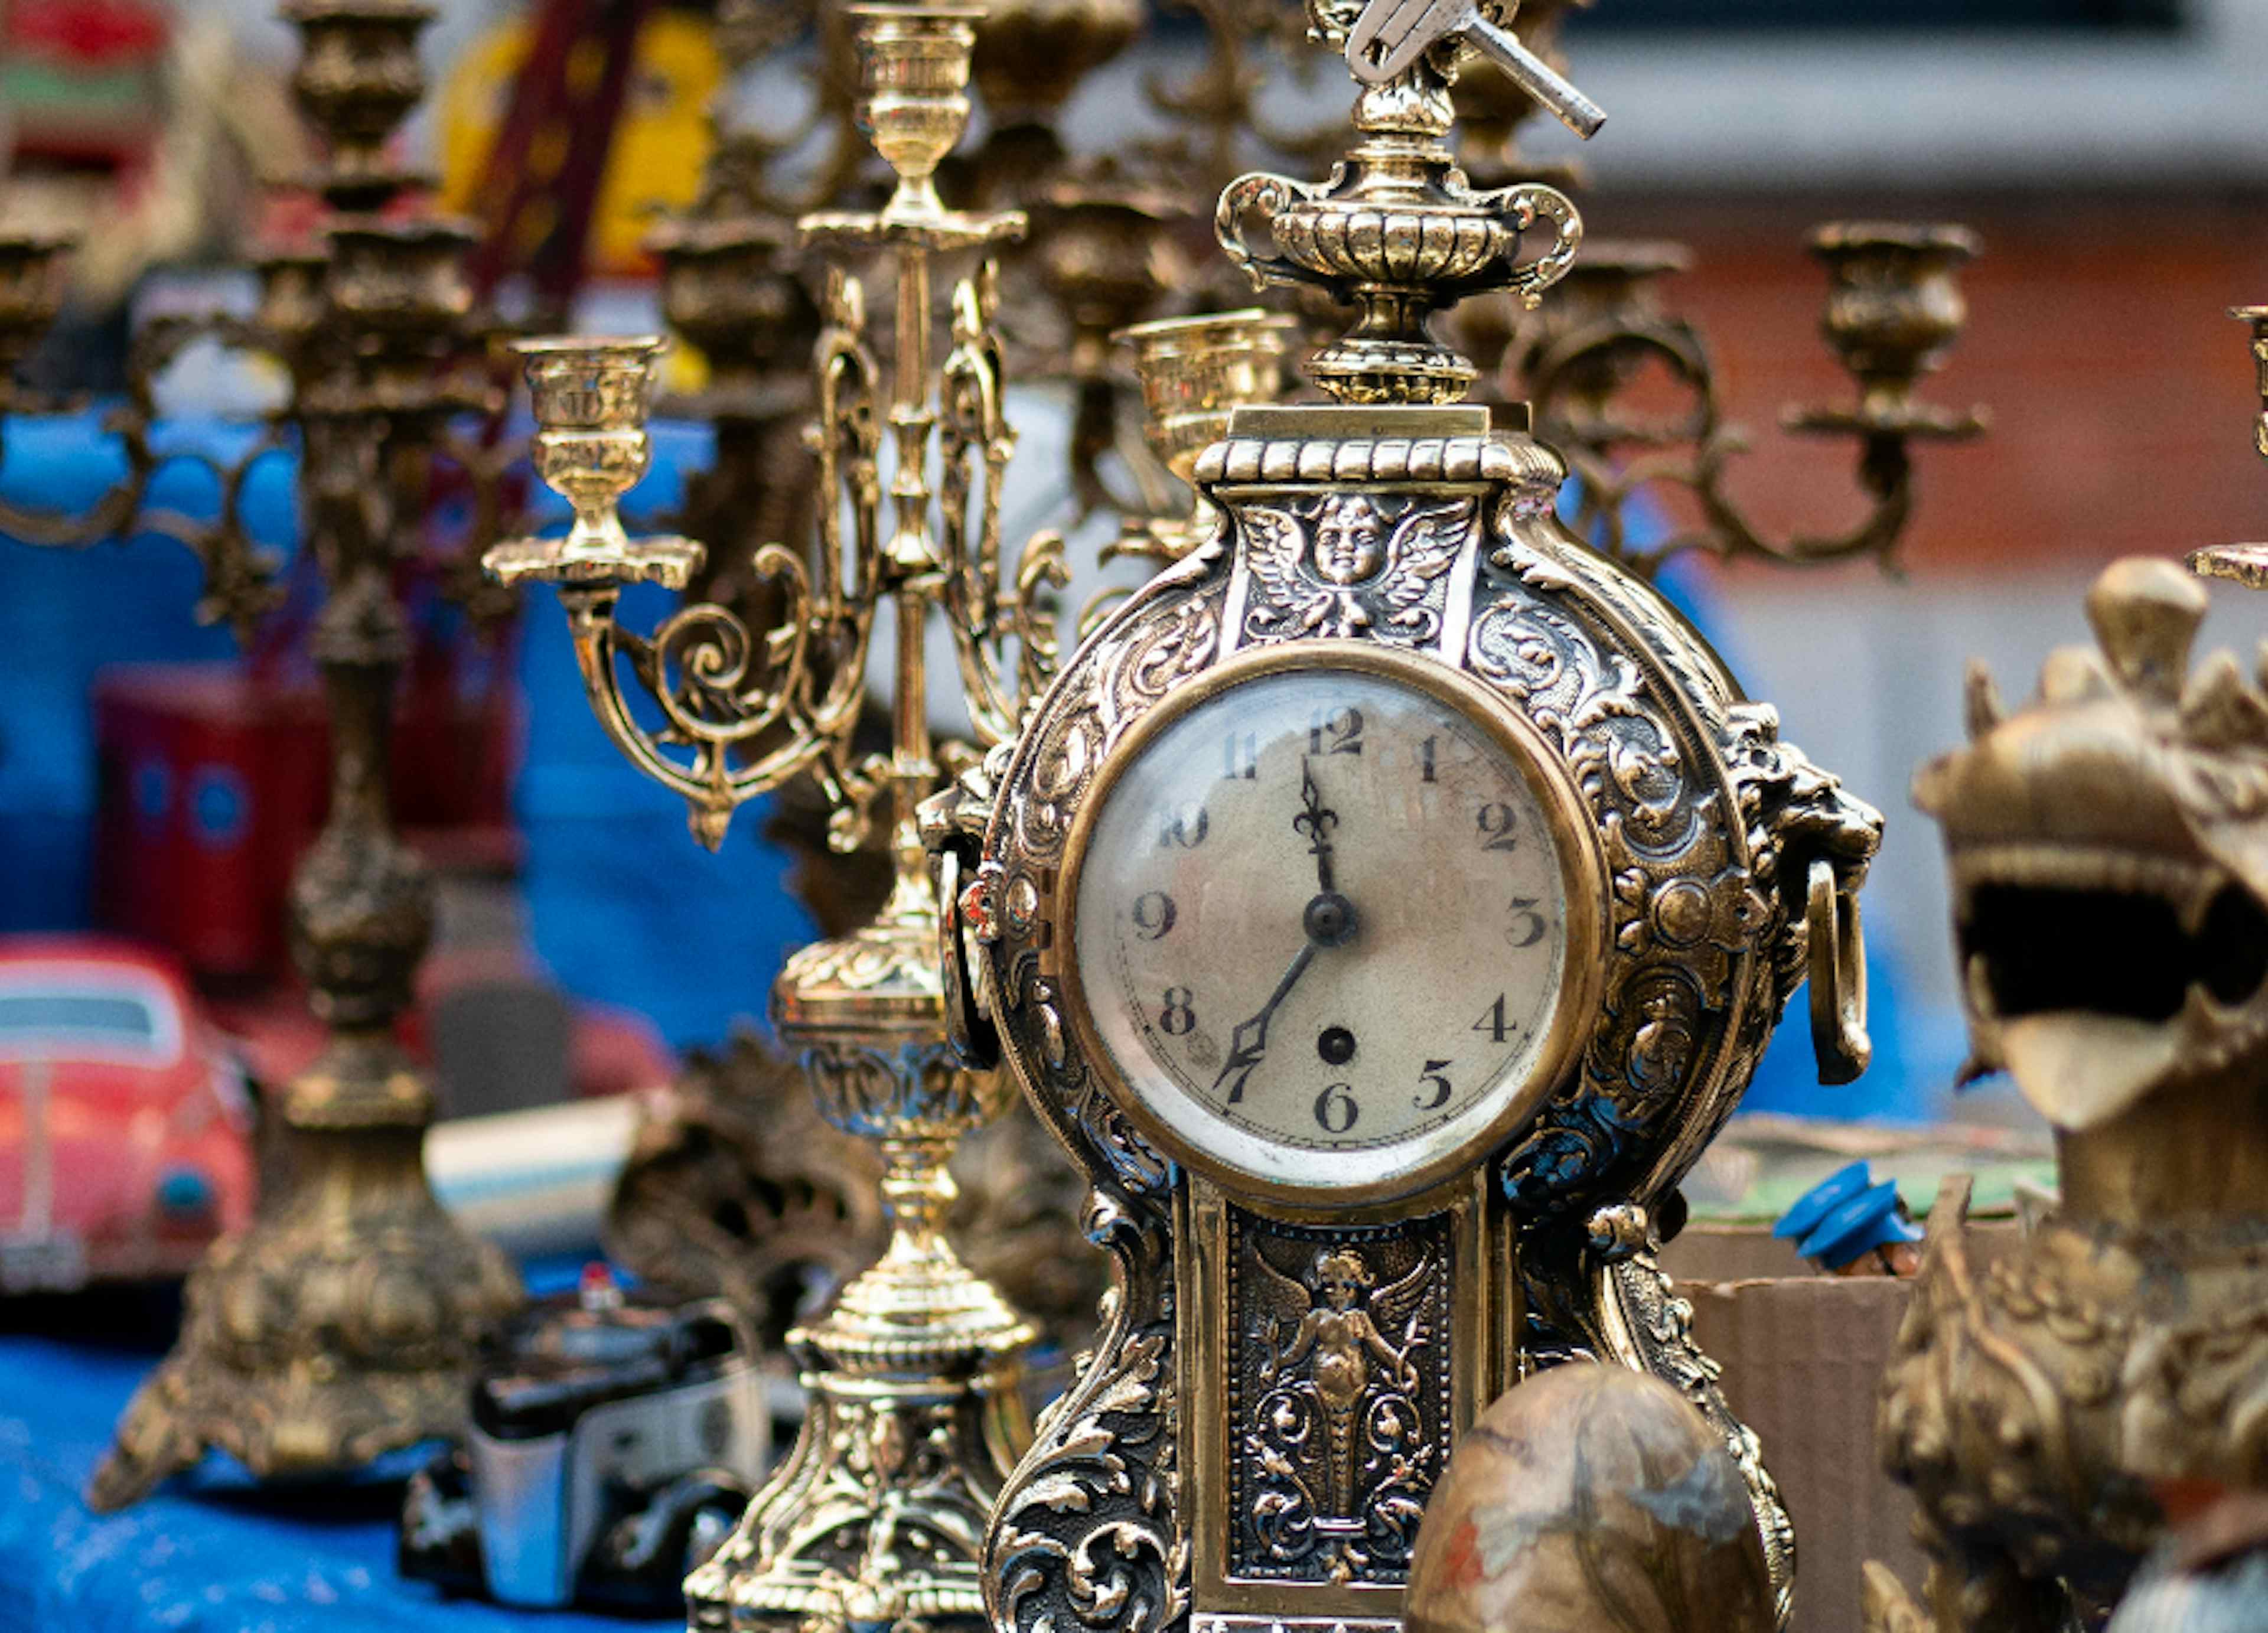 Beautiful brass and golden vintage desktop clocks offered at Vintage Market Days of Blackfoot of the Yellowstone Teton Territory. 